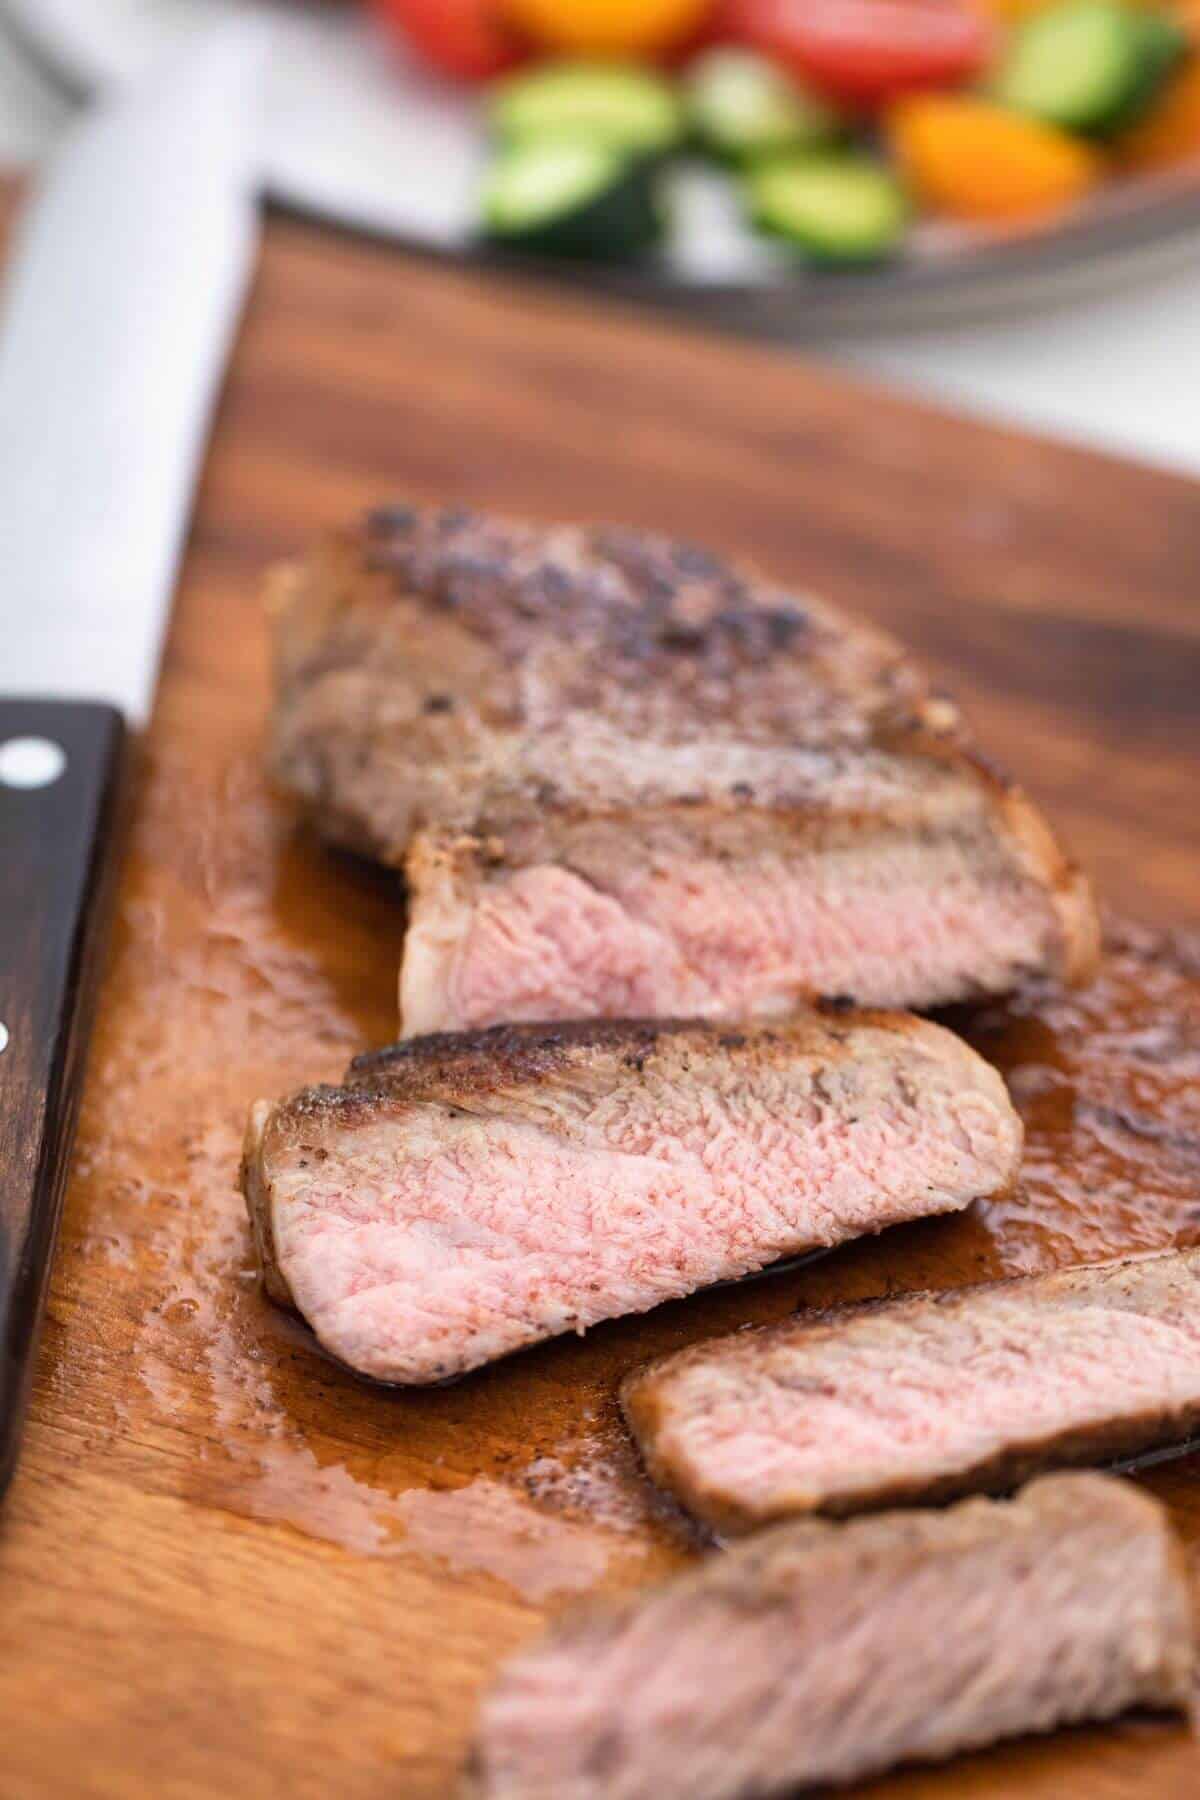 Steak on a cutting board with vegetables and a knife.